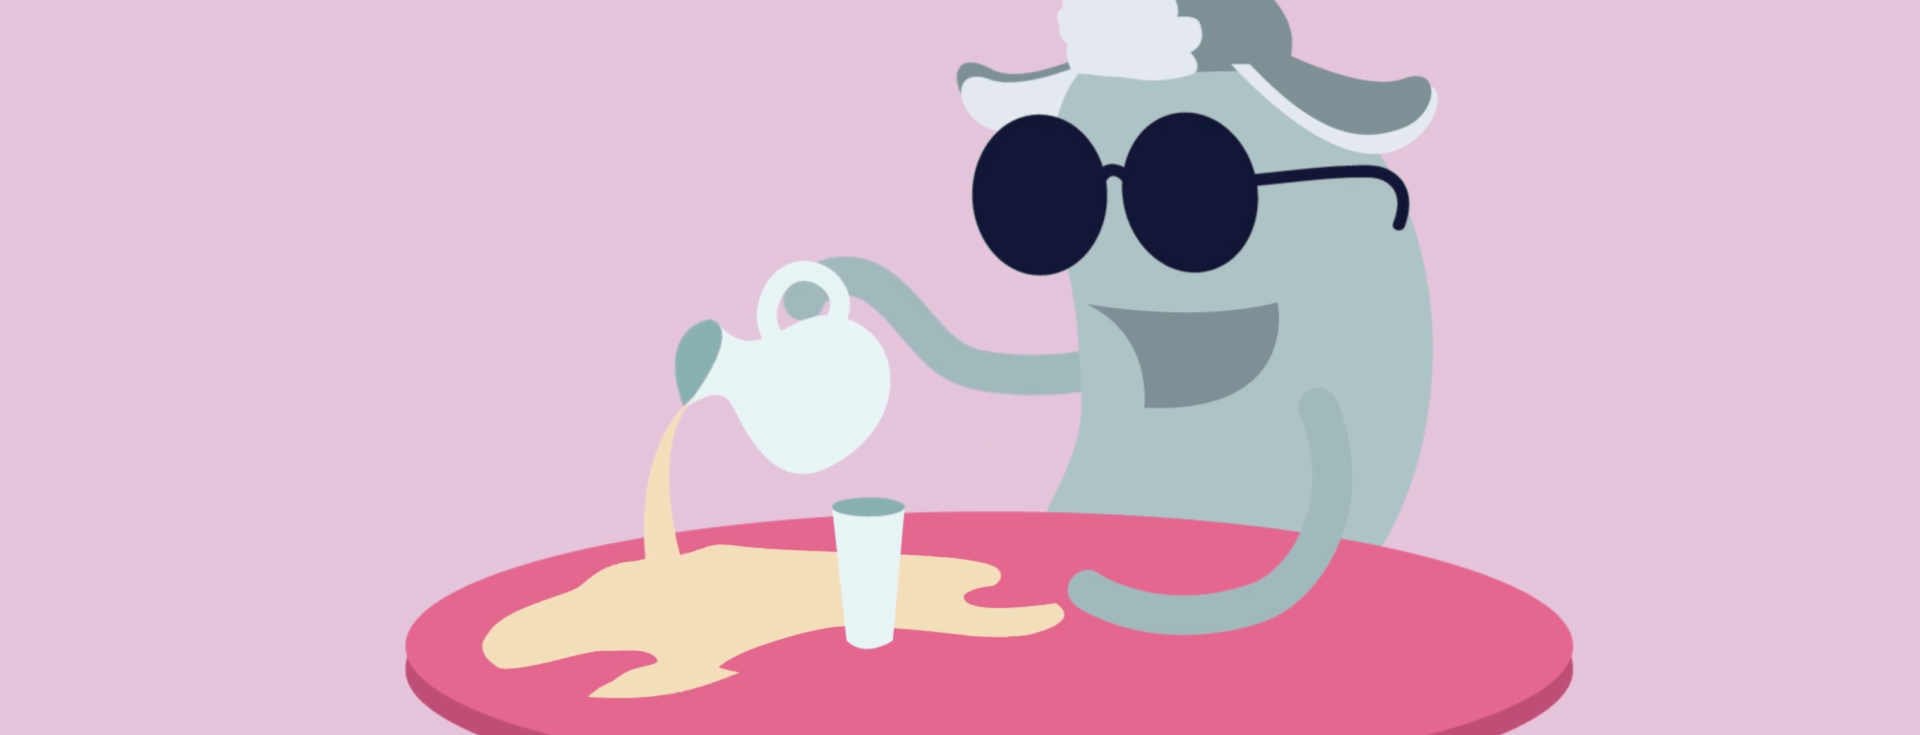 An illustrated character pouring a drink and missing the cup